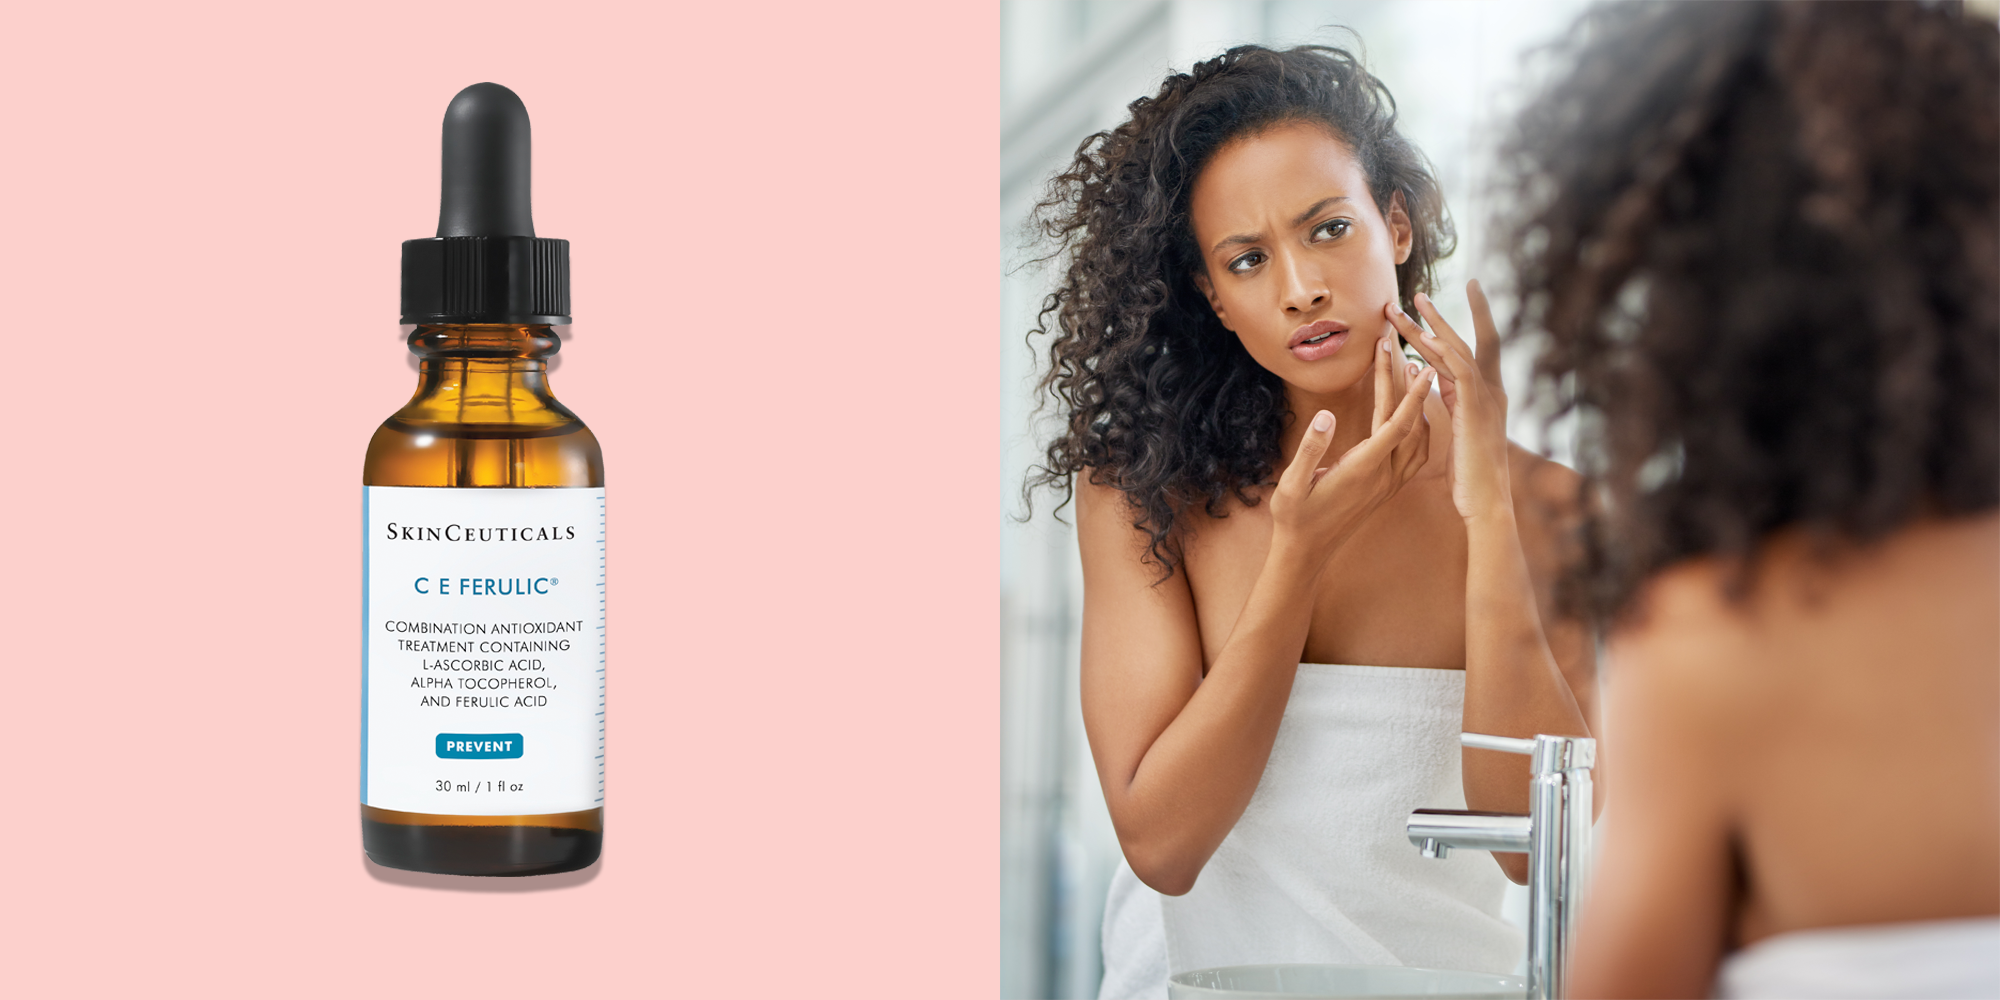 14 Best Vitamin C Serums 2020 Recommended By Dermatologists